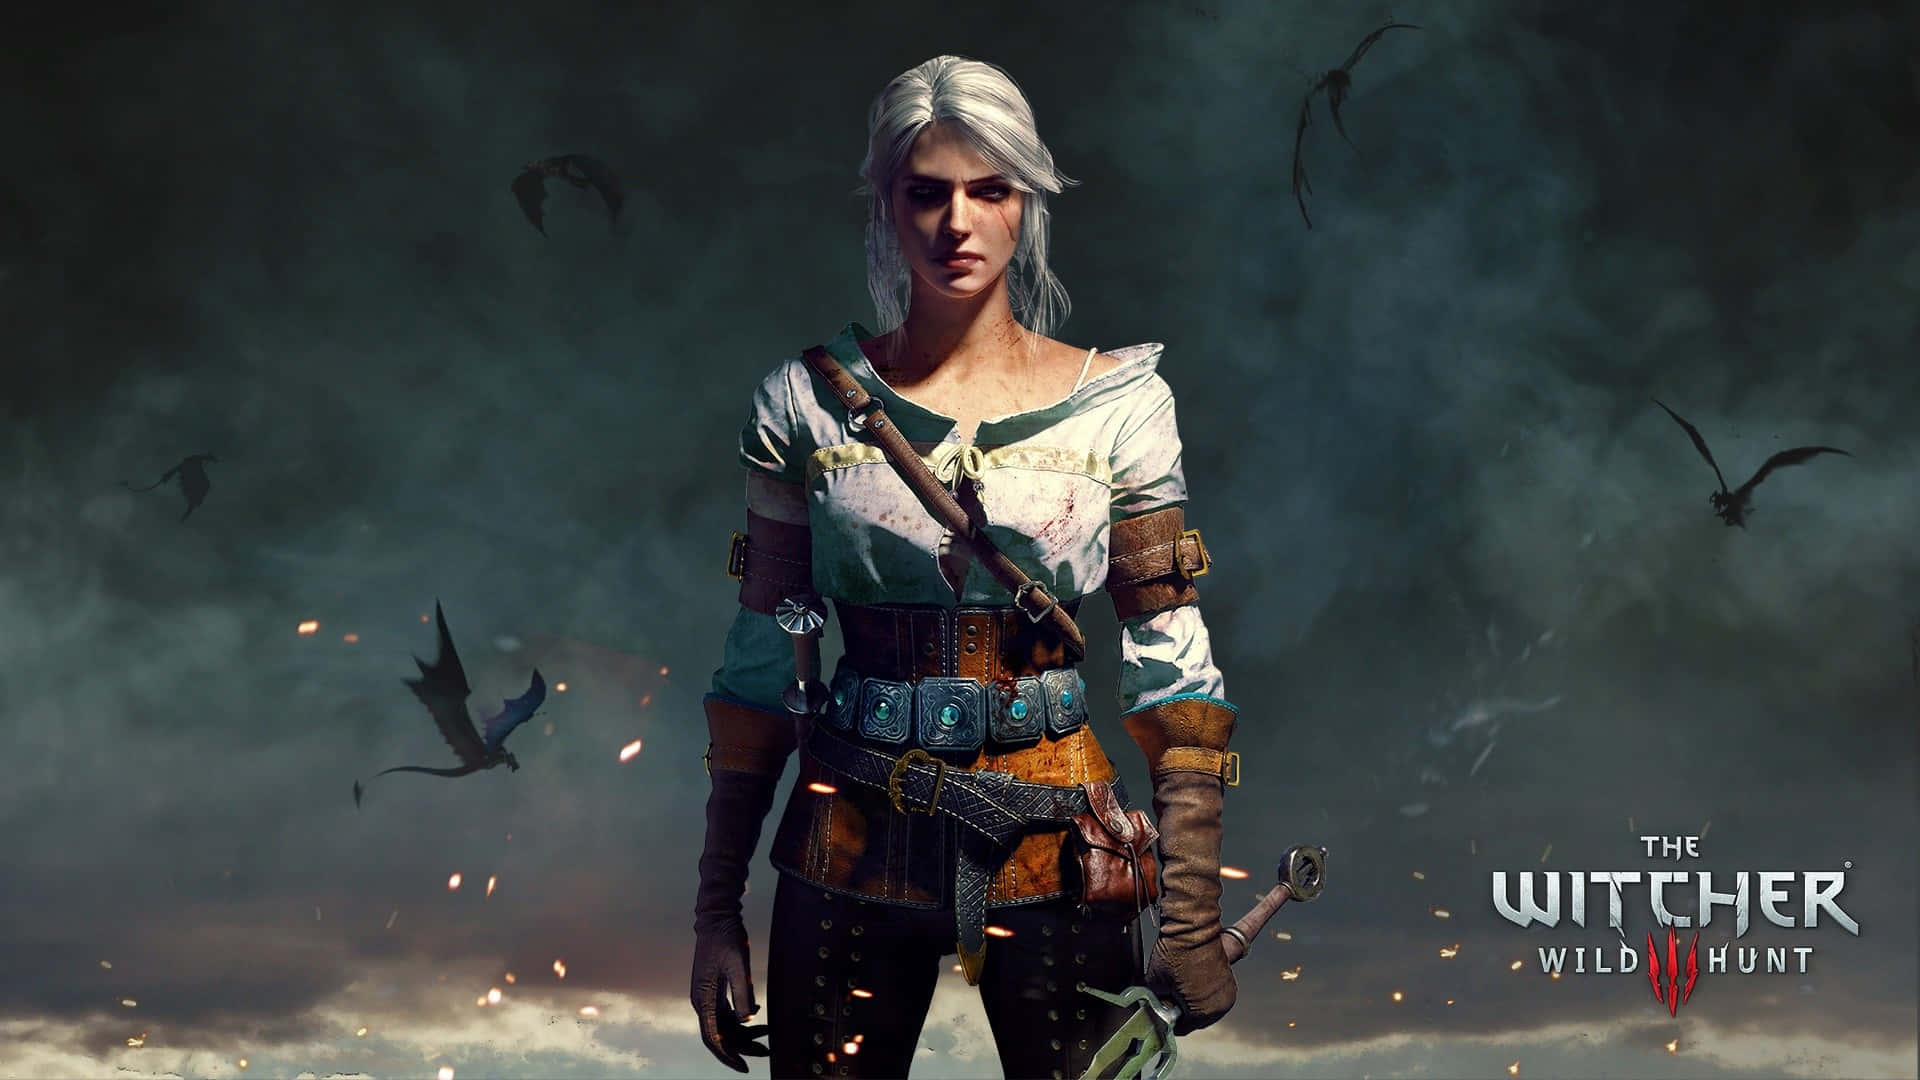 Outwit enemies and search for answers in the massive open-world of "The Witcher 3"!